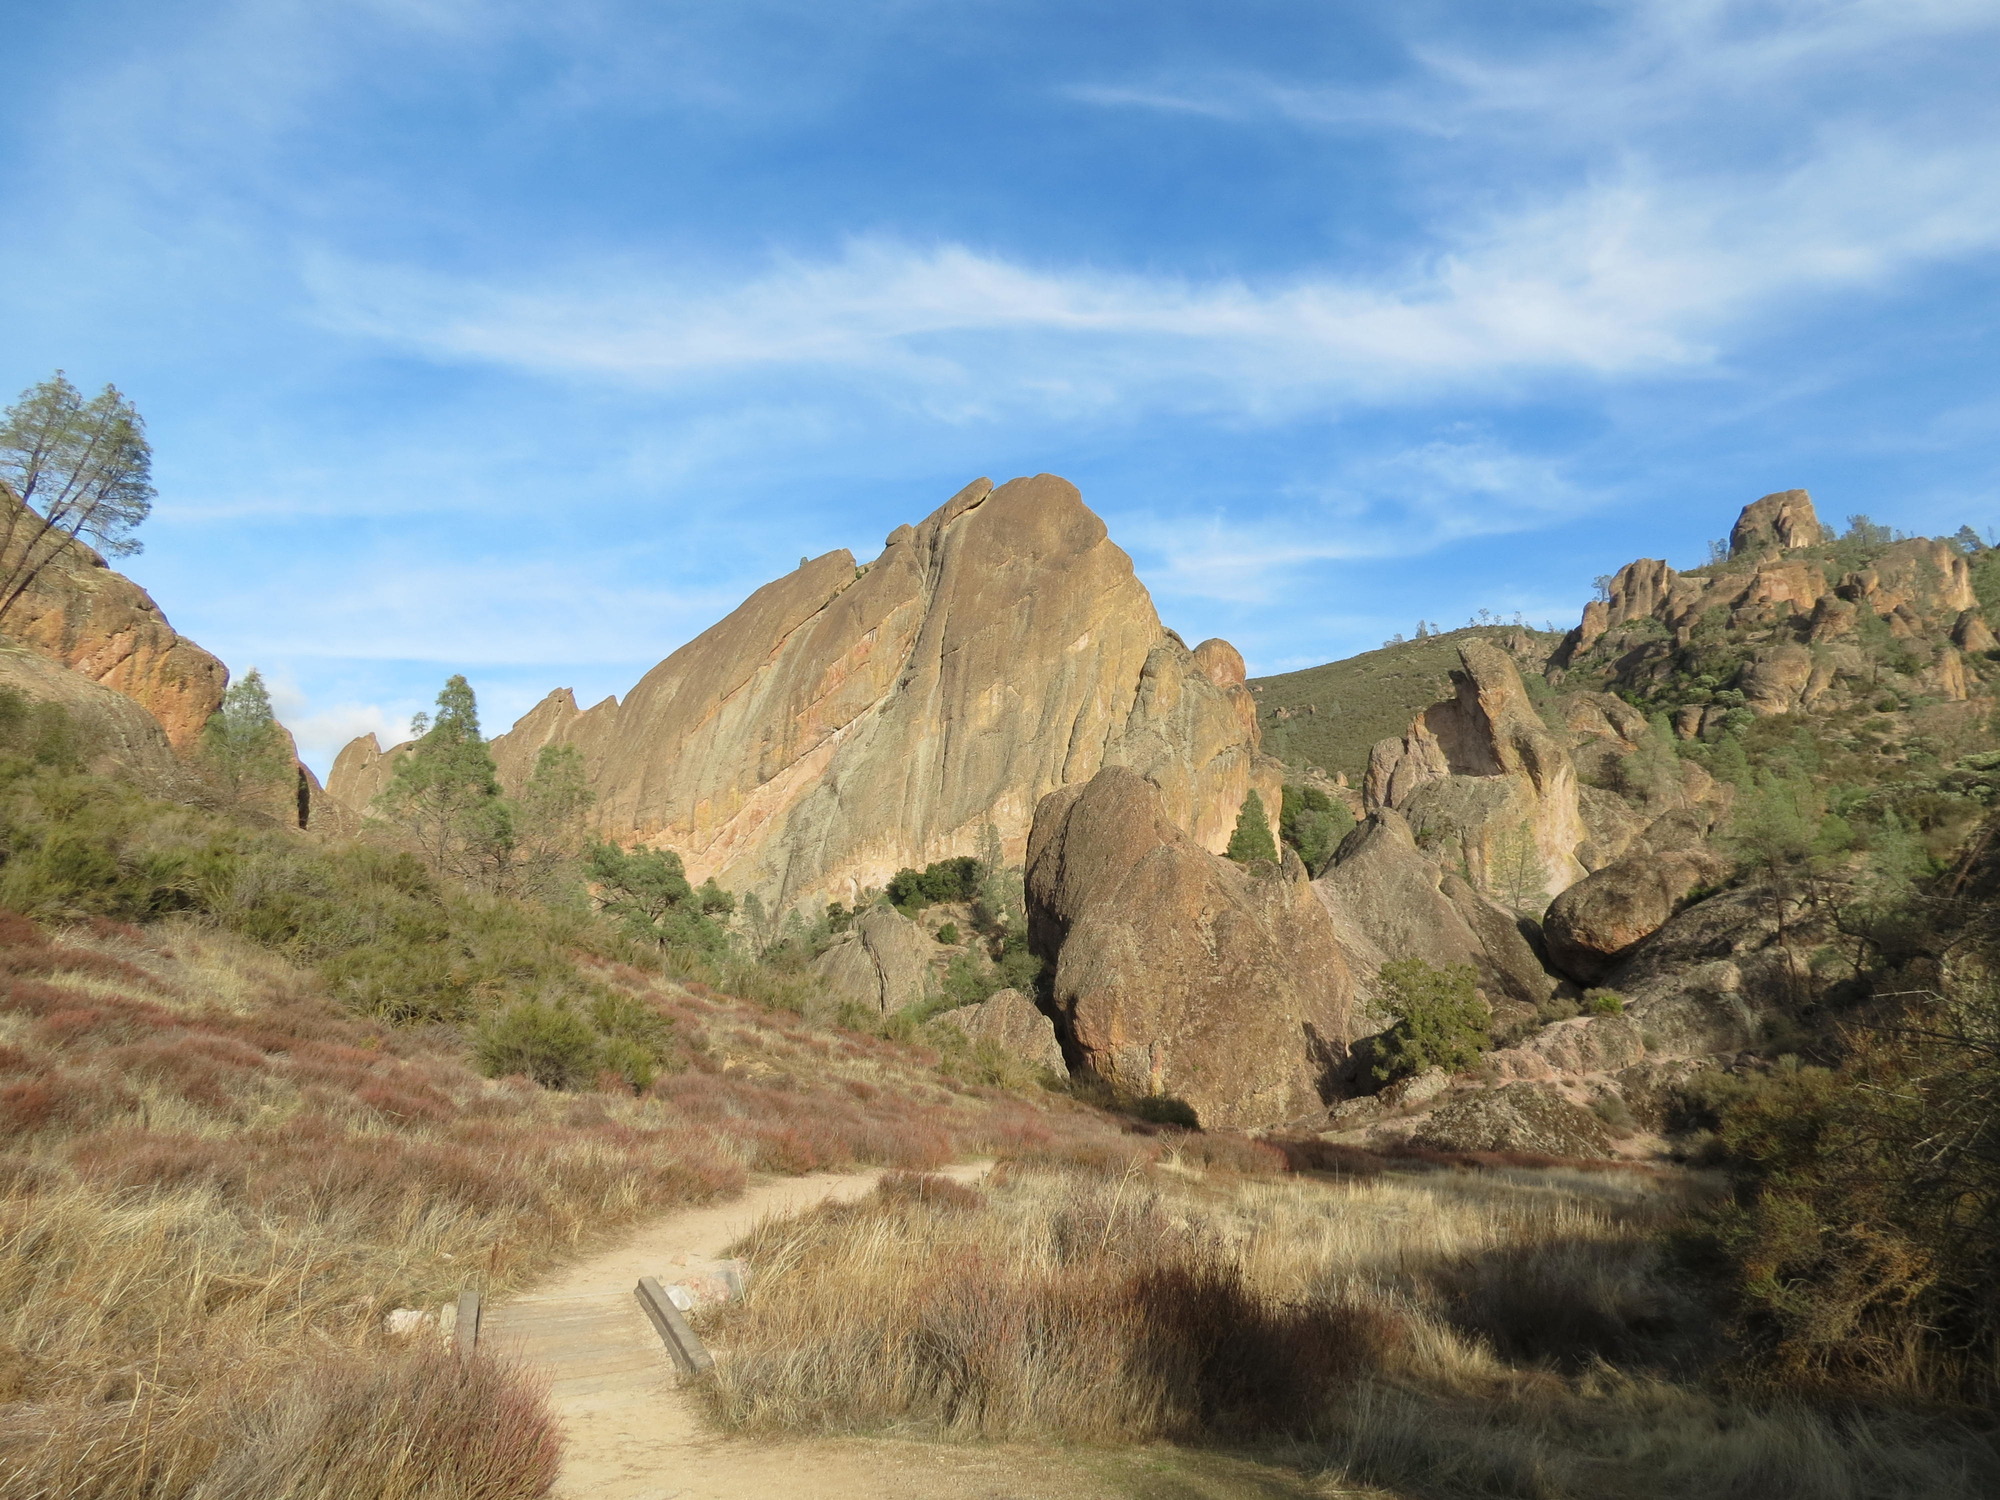 A sandy trail winds through dried grasses and brush and disappears into the rocks and cliffs on the horizon.